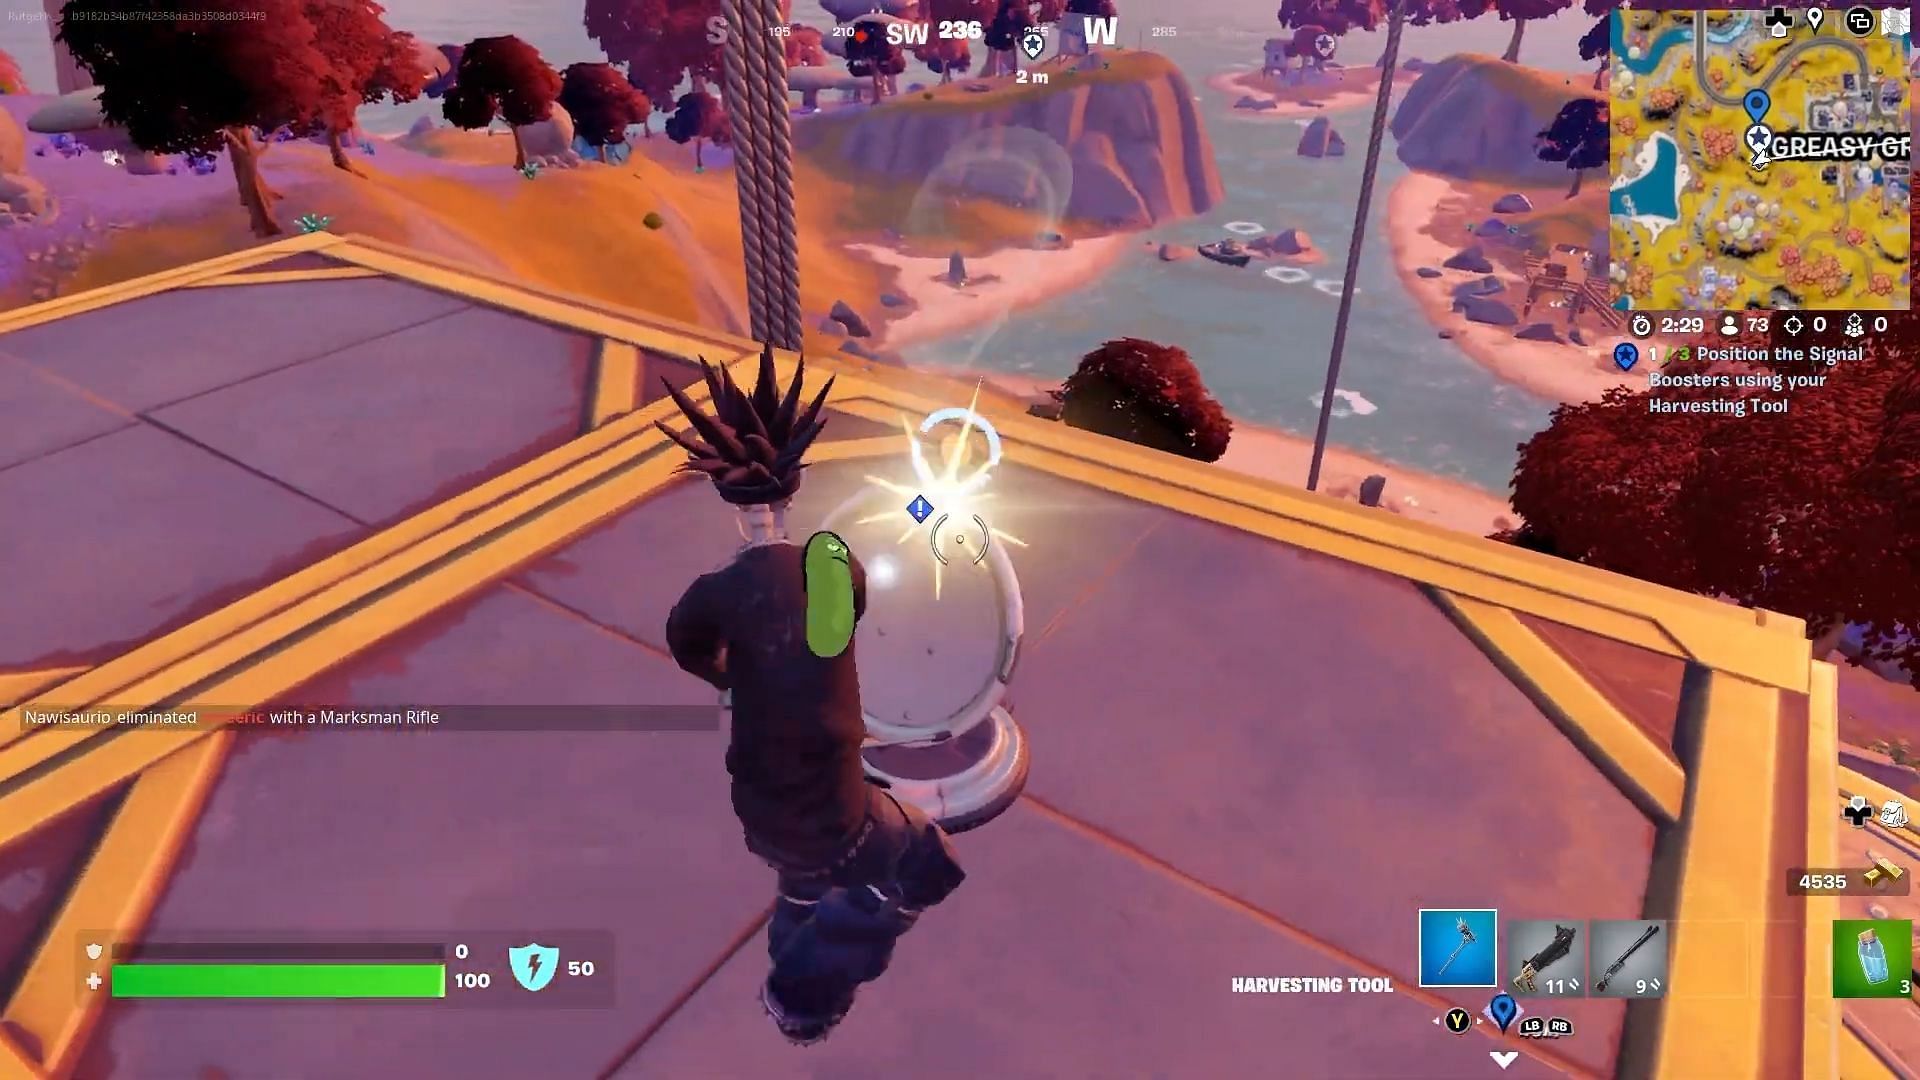 Fortnite Paradise Quests Part 2 requires you to position Signal Boosters (Image via Epic Games)